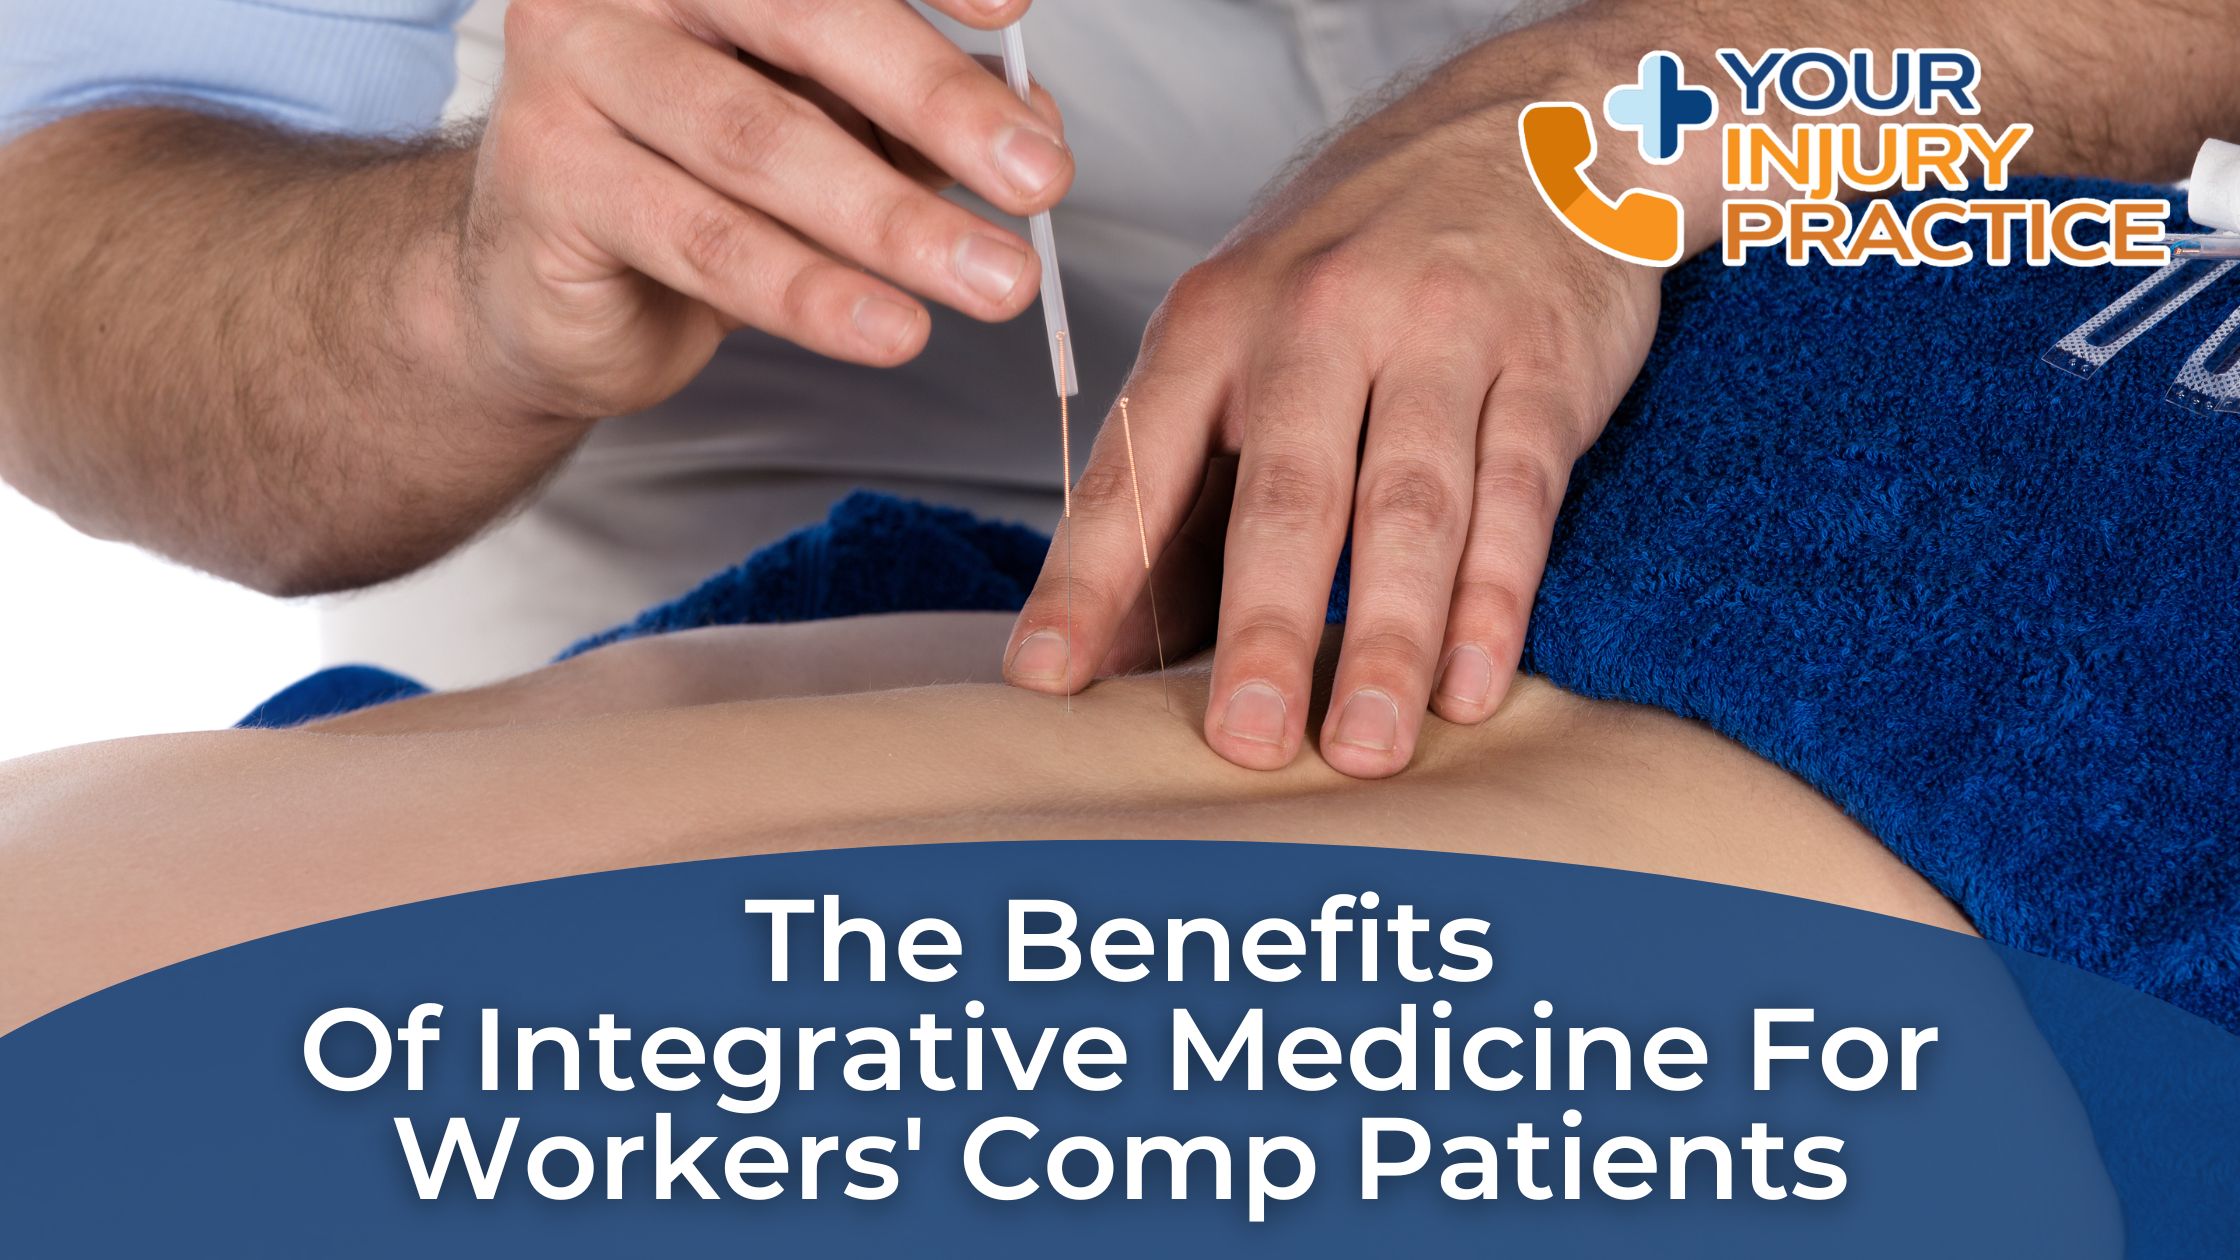 The Benefits of Integrative Medicine for Workers' Comp Patients